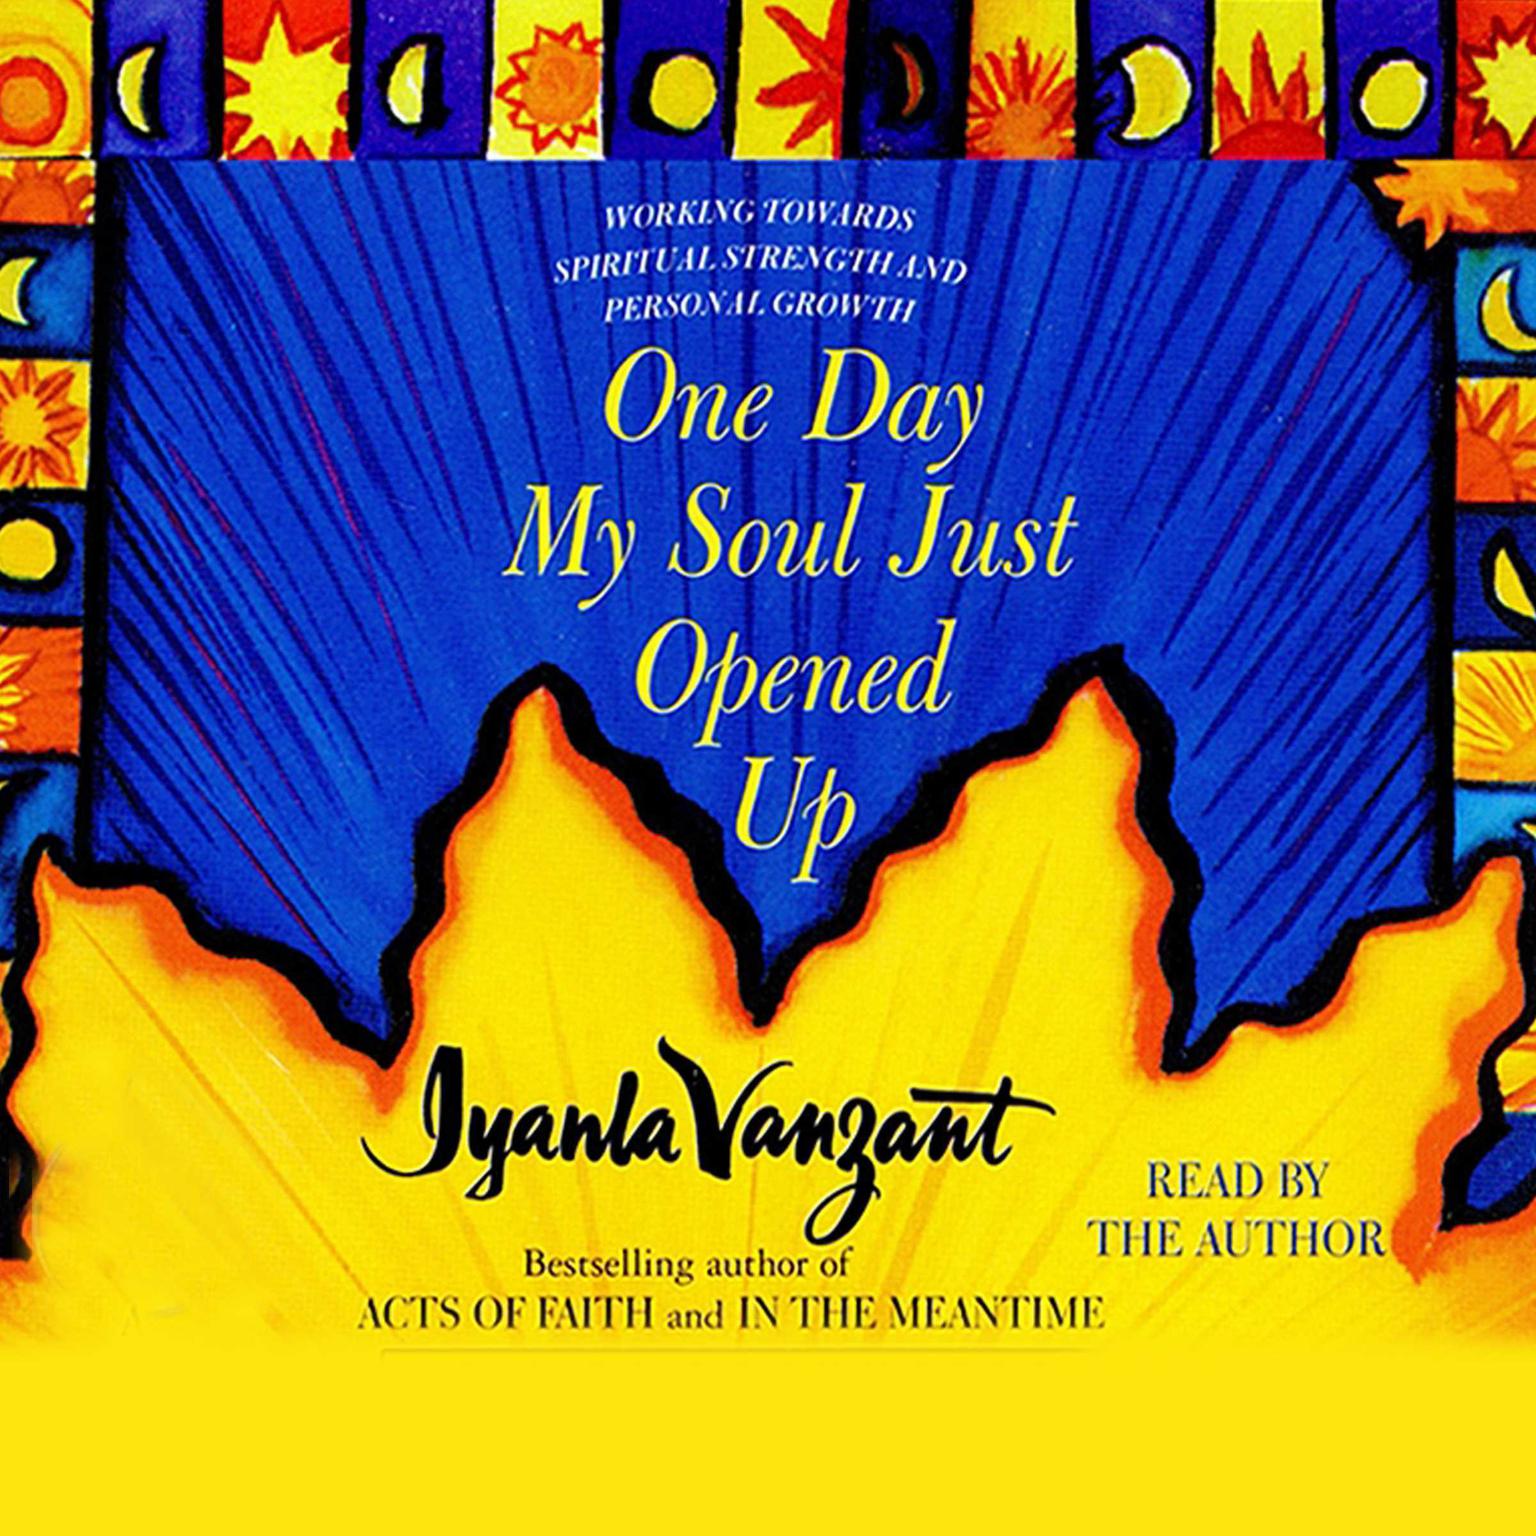 One Day My Soul Just Opened Up (Abridged): Working Toward Spiritual Strength and Personal Growth Audiobook, by Iyanla Vanzant